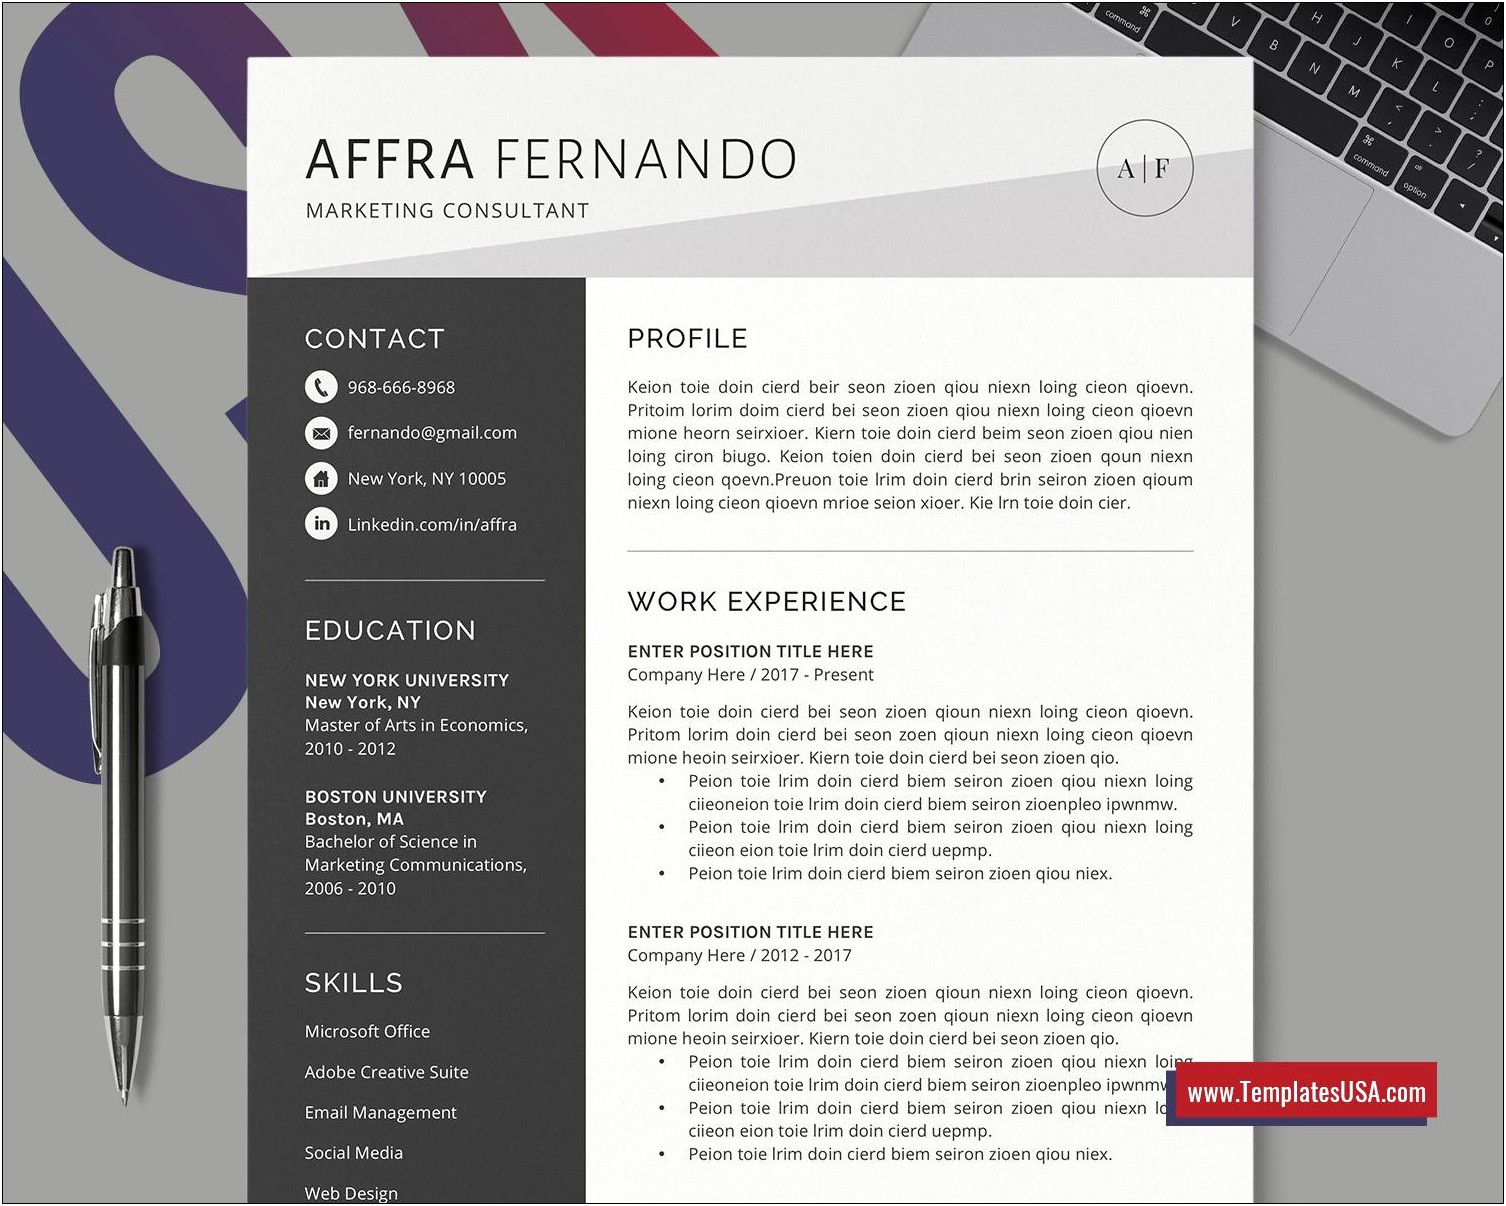 Creative Resumes That Get Jobs